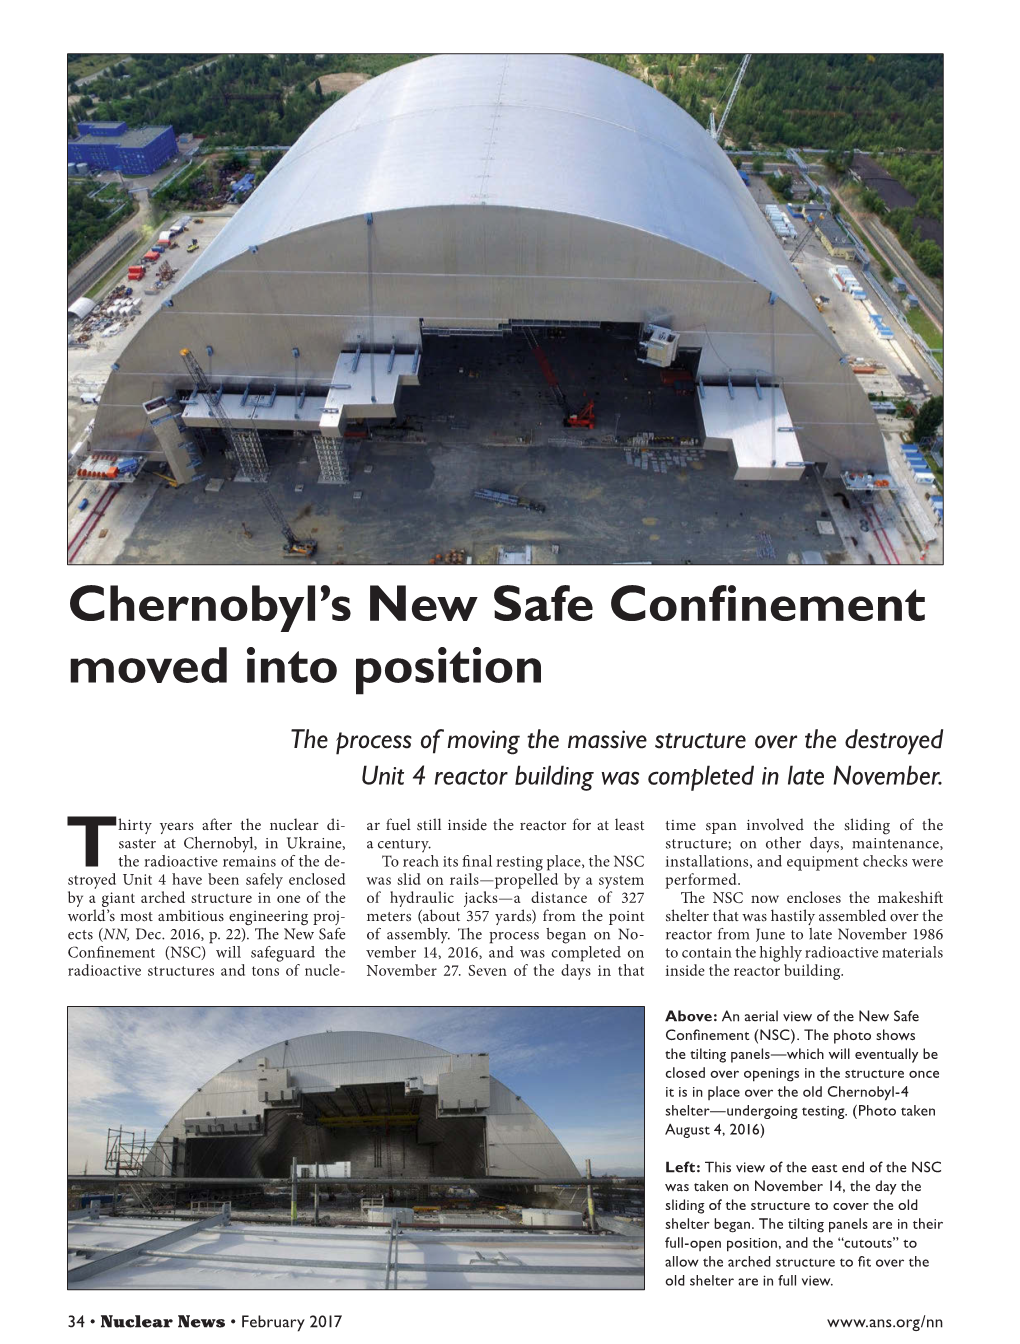 Chernobyl's New Safe Confinement Moved Into Position